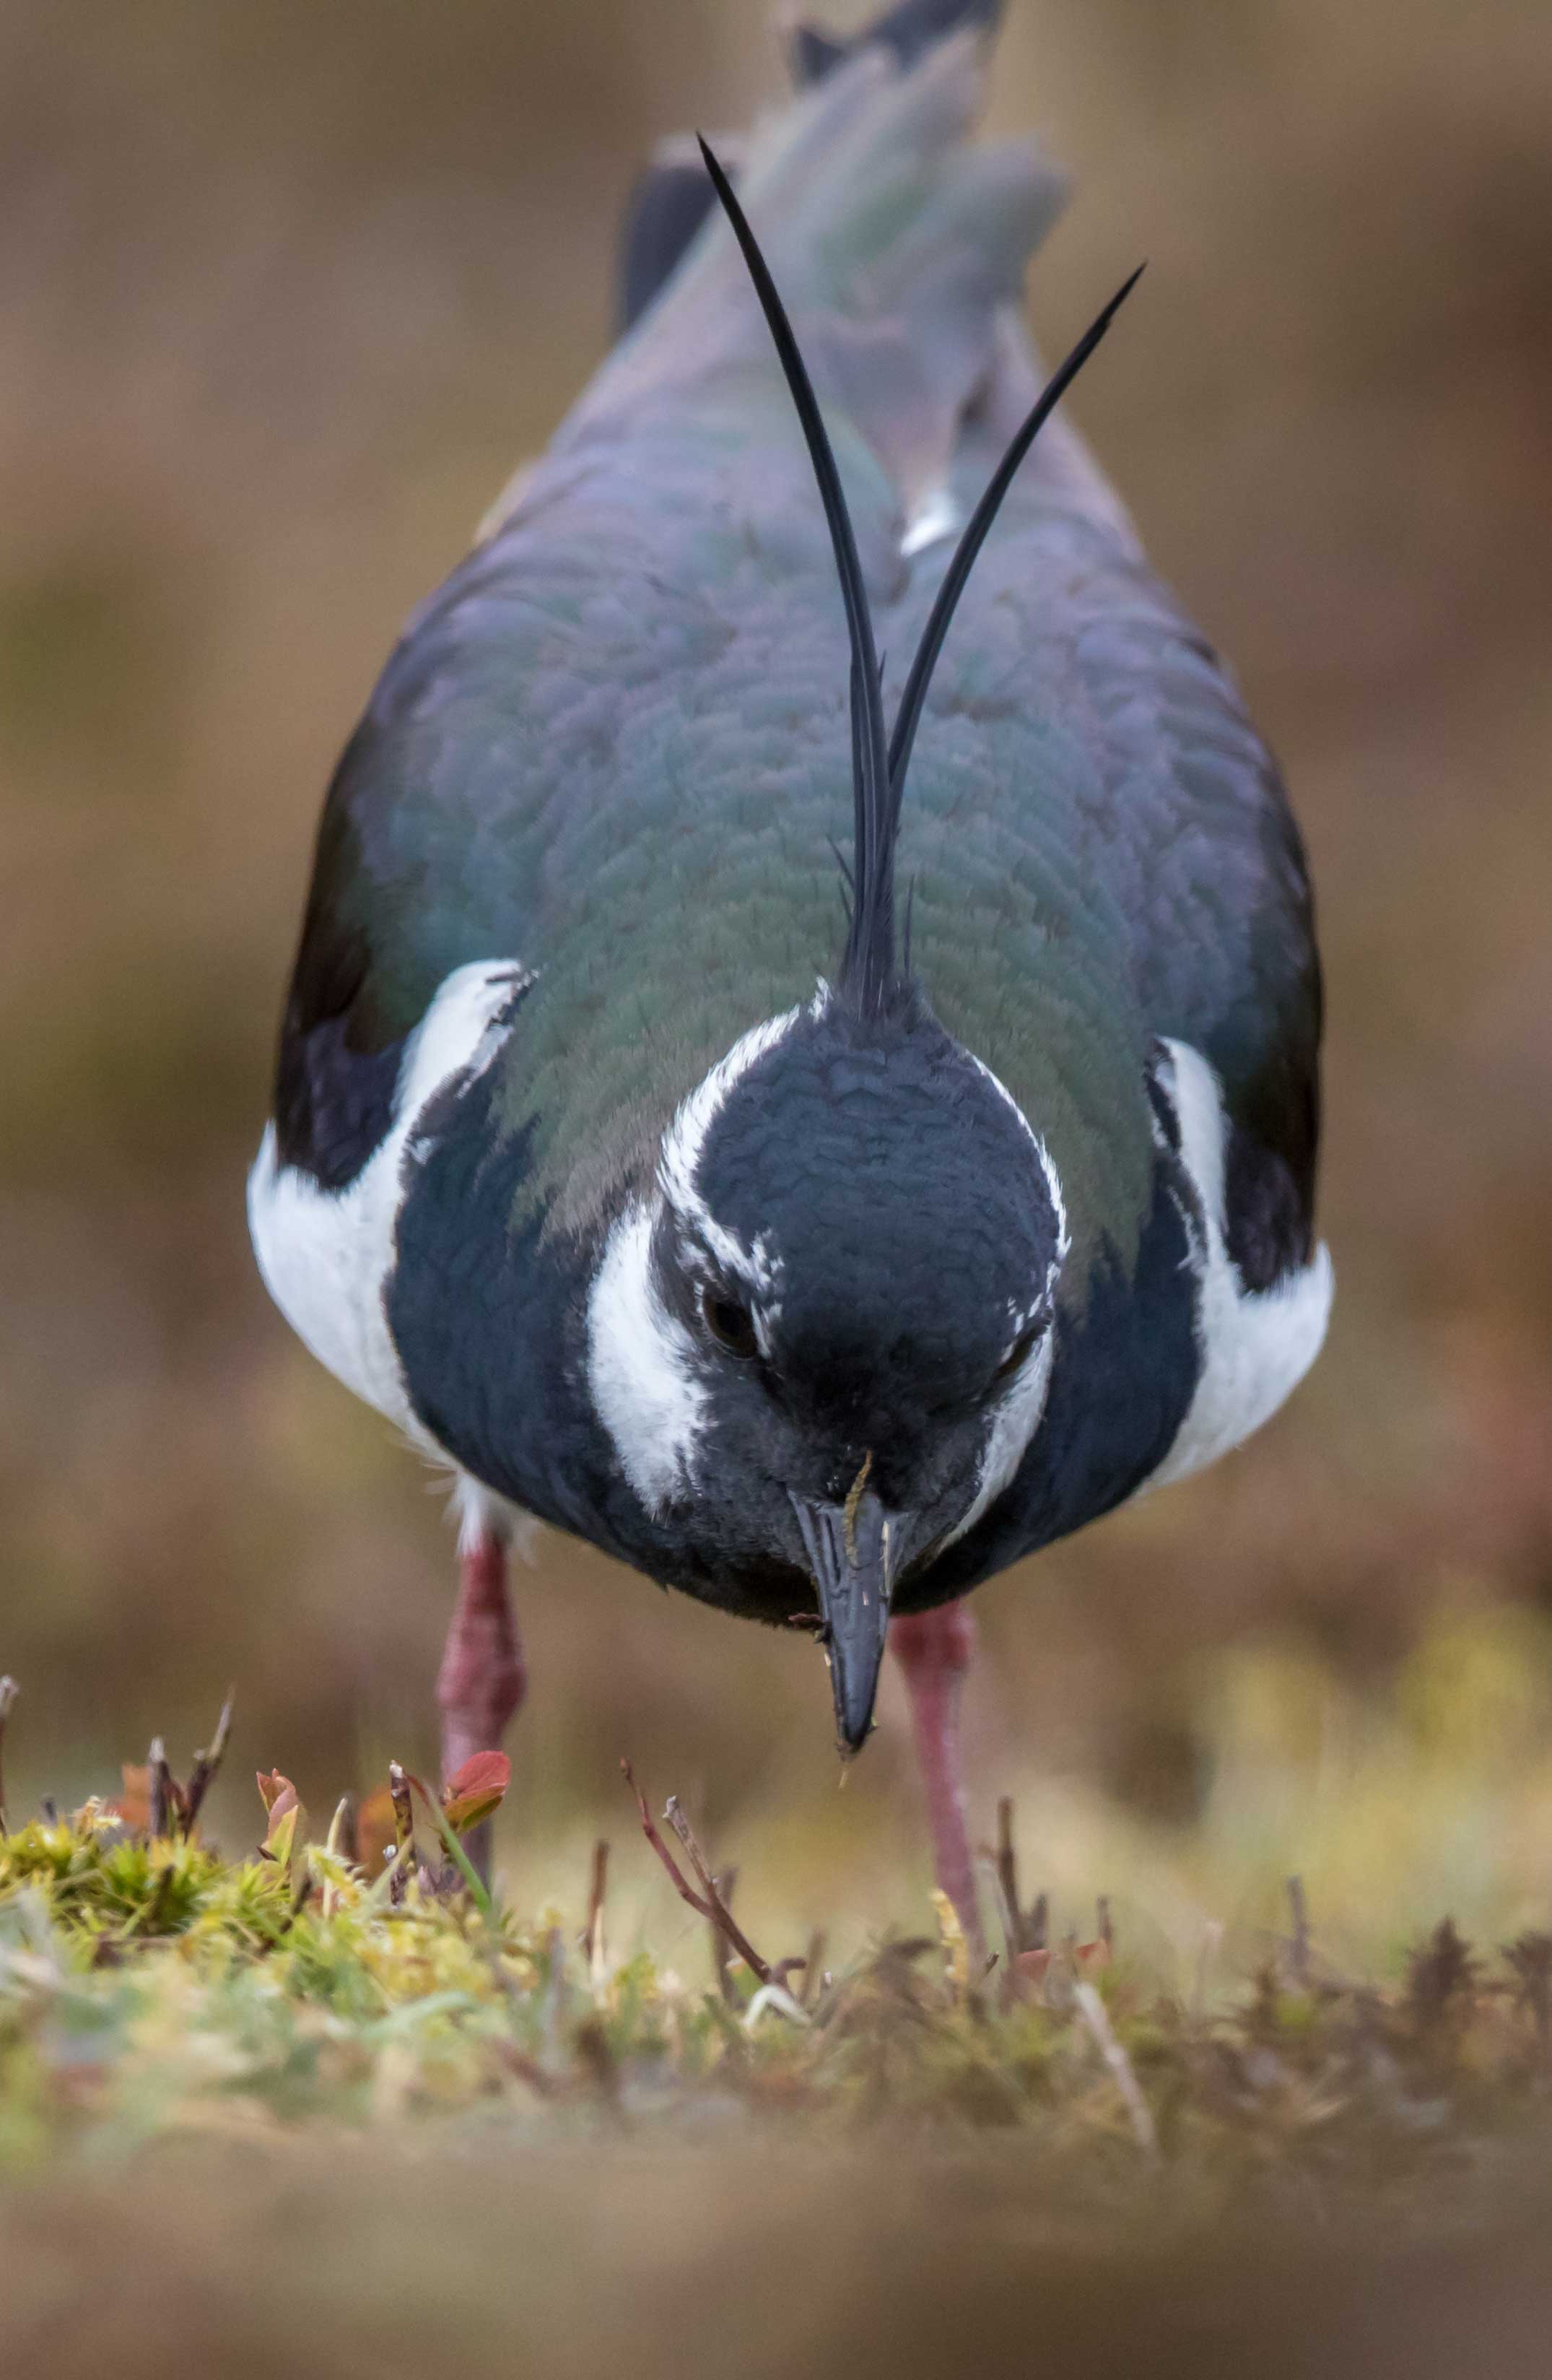 Lapwing with its beak close to the ground. Credit Paul Harris.